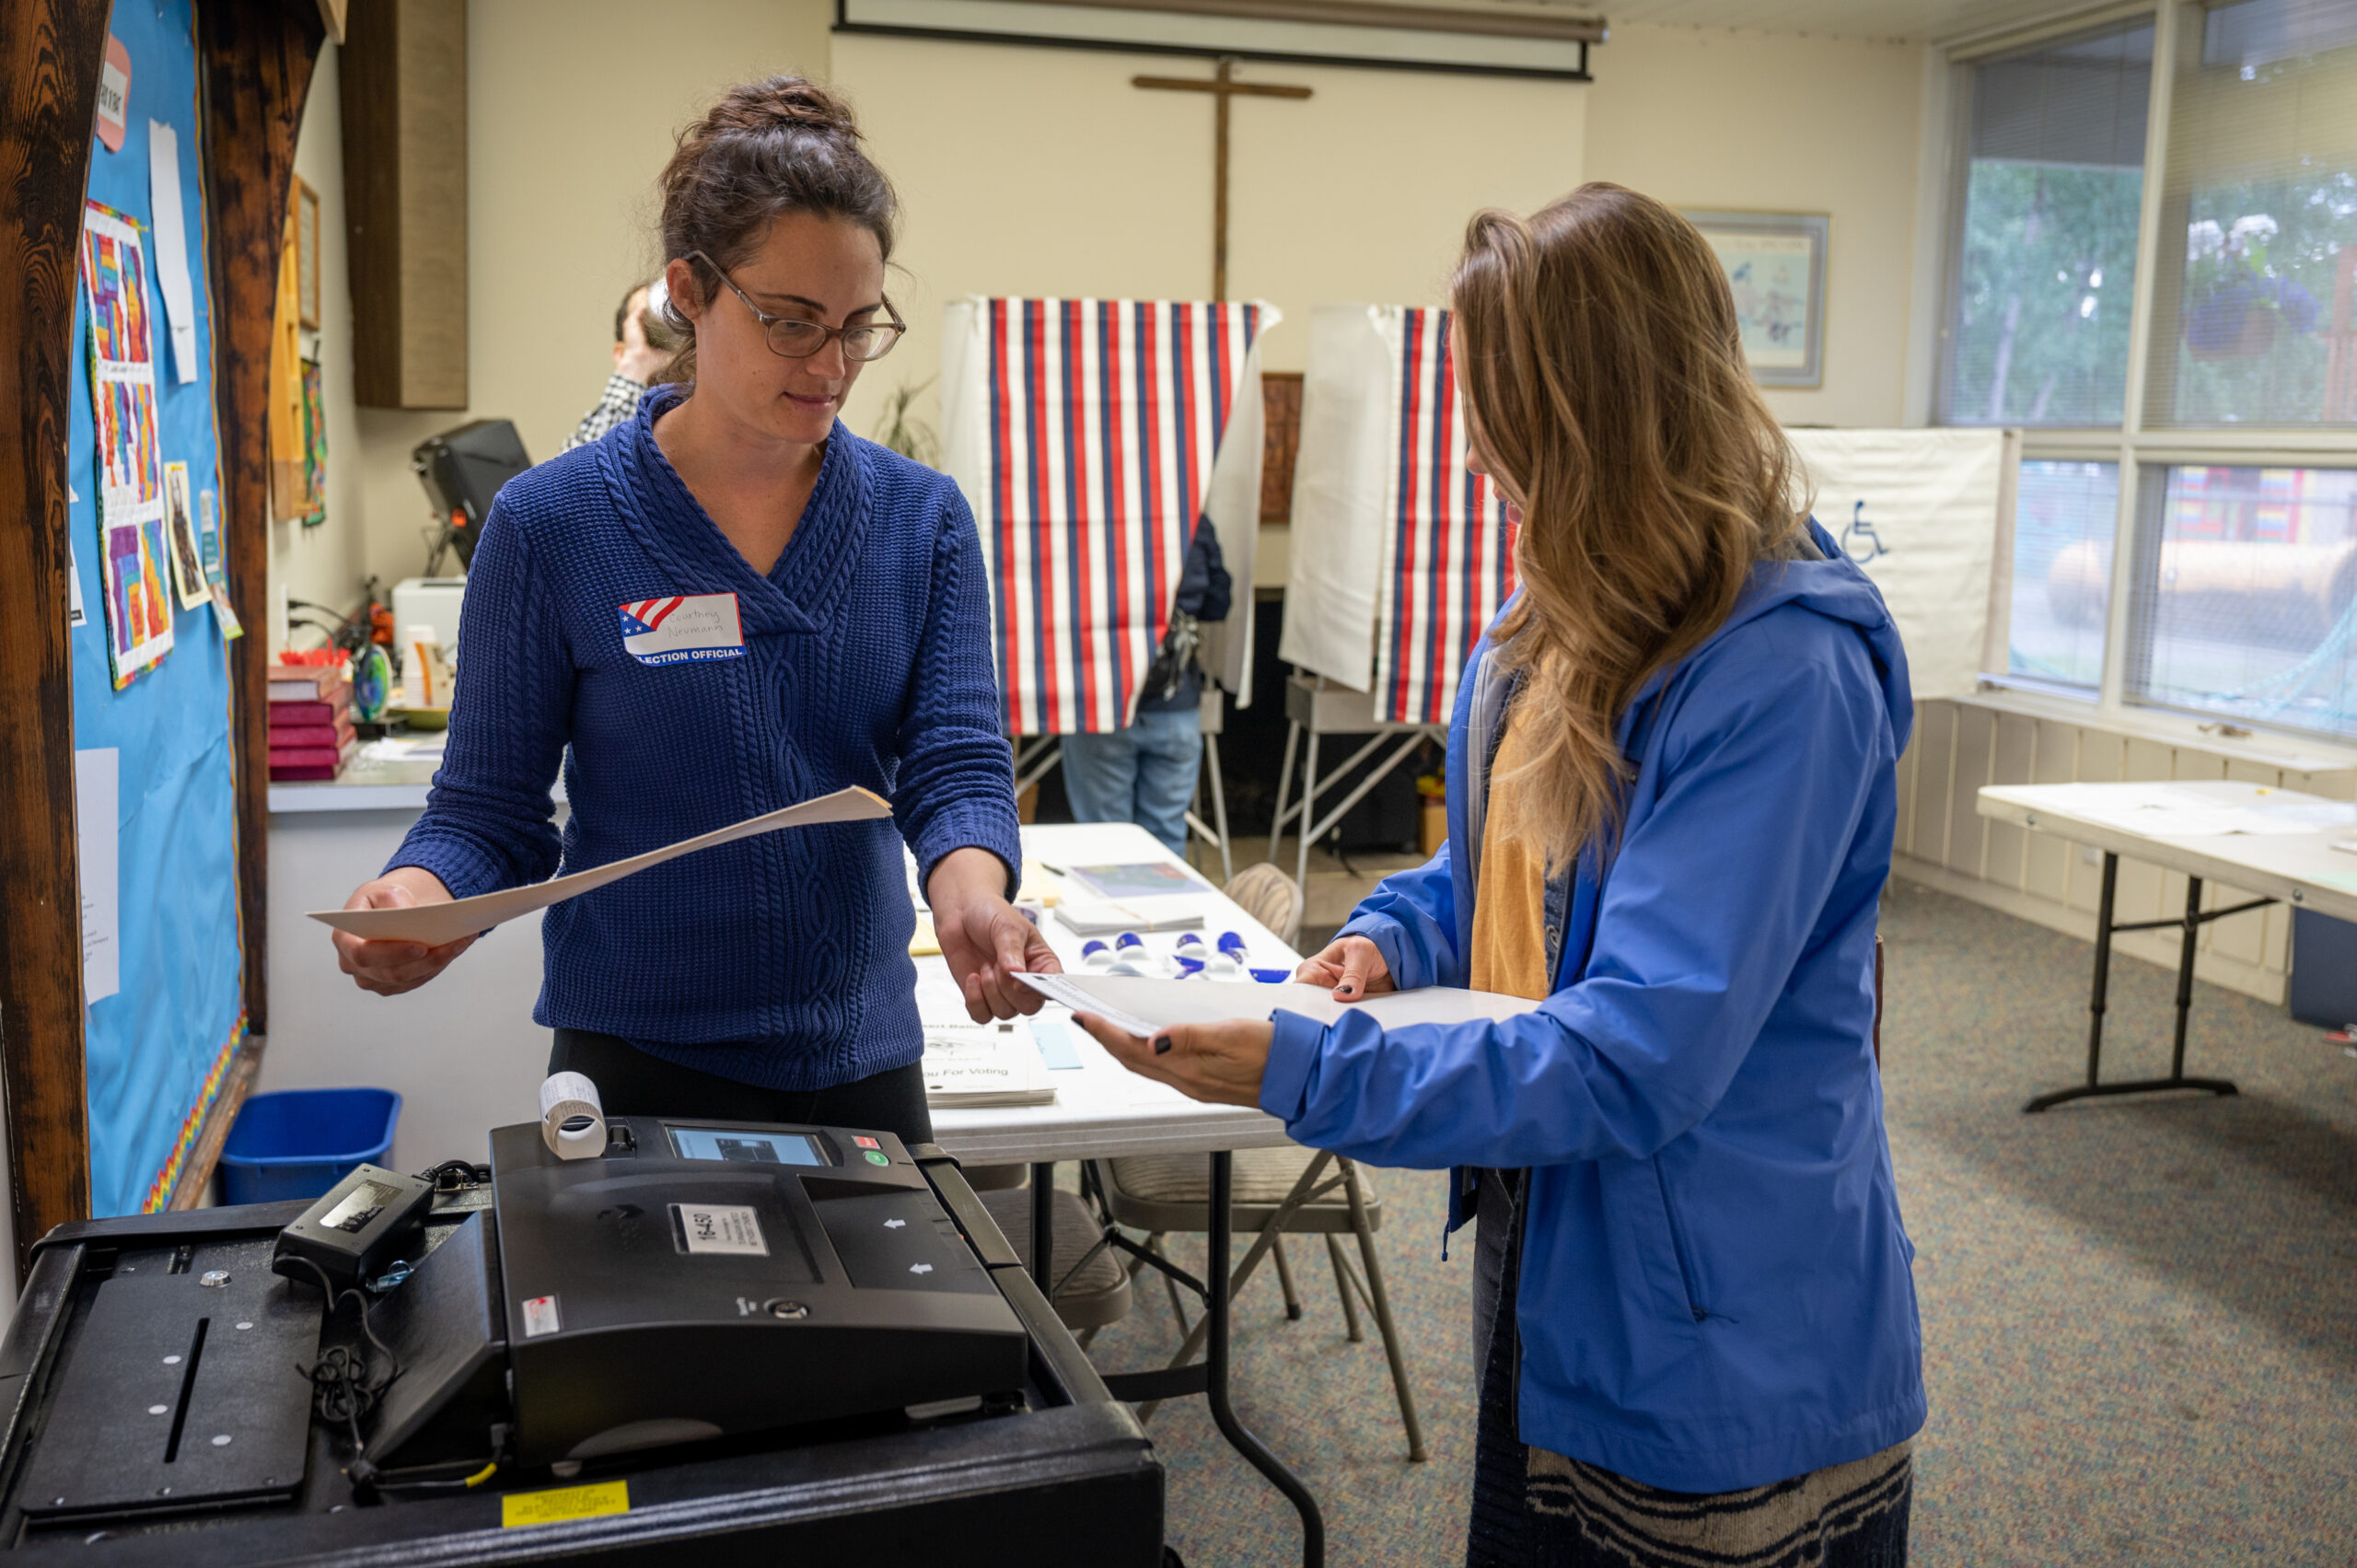 A woman in a blue shirt helping another woman with her voting ballot